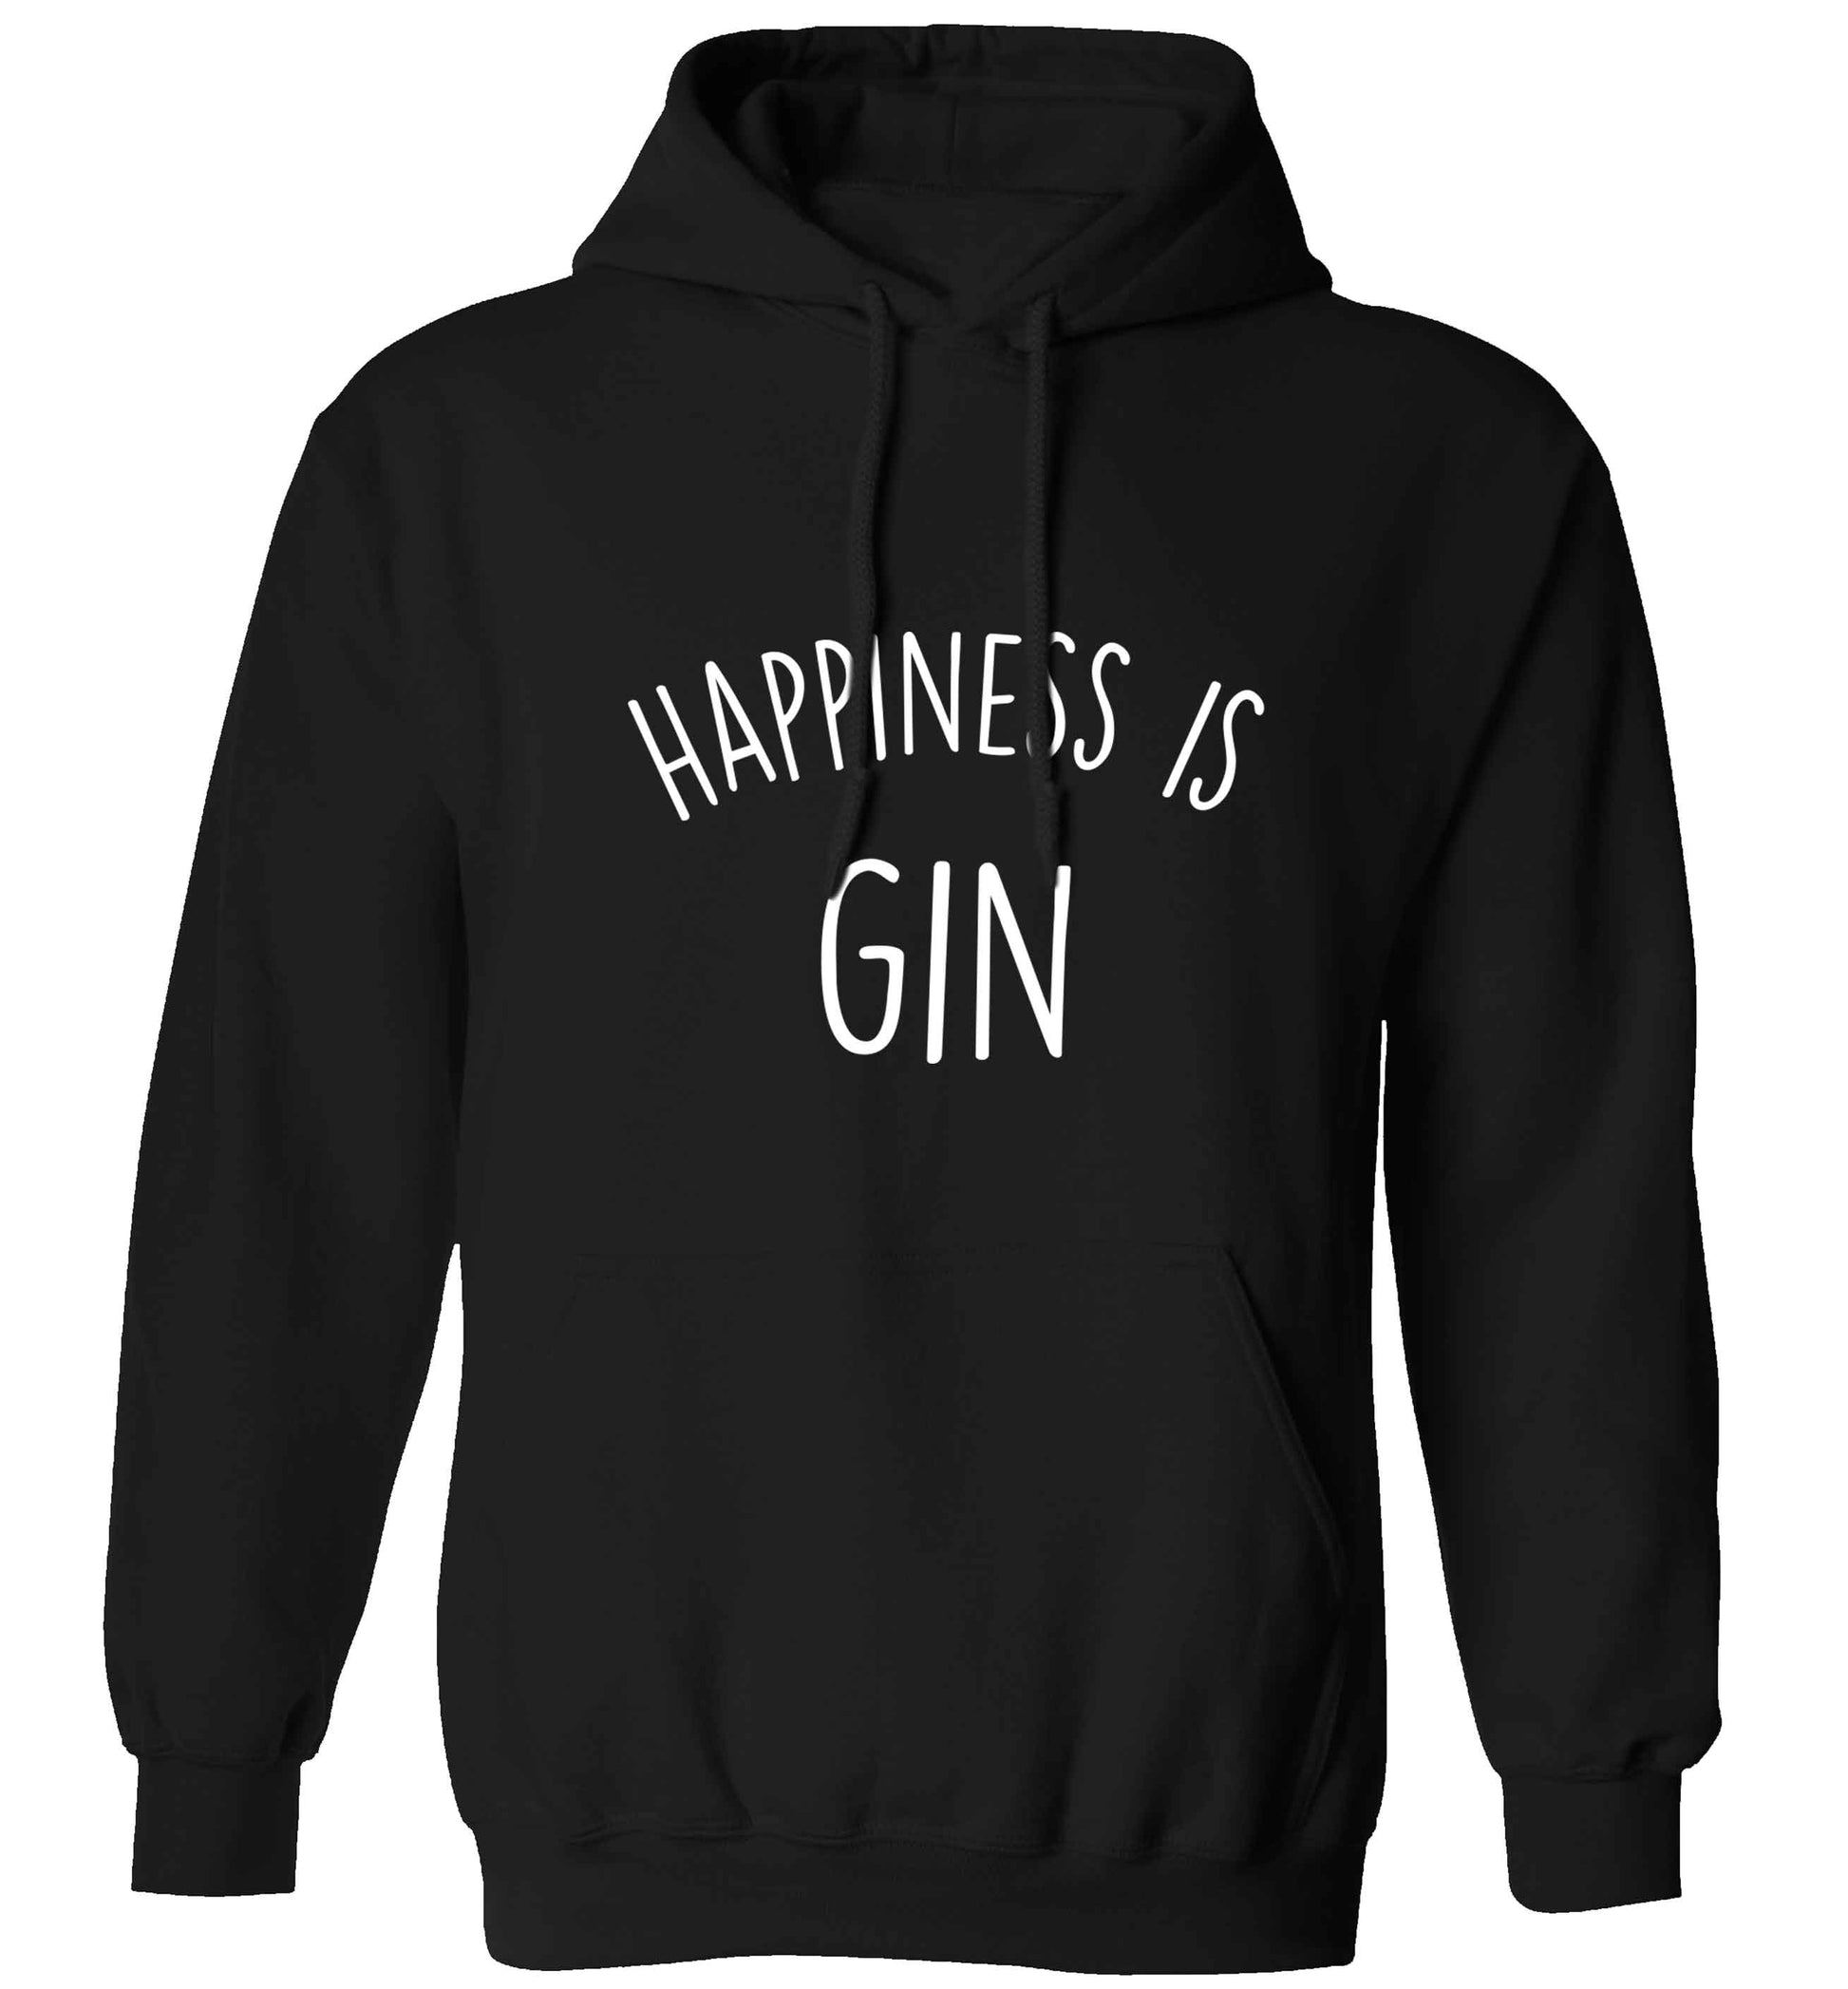 Happiness is gin adults unisex black hoodie 2XL